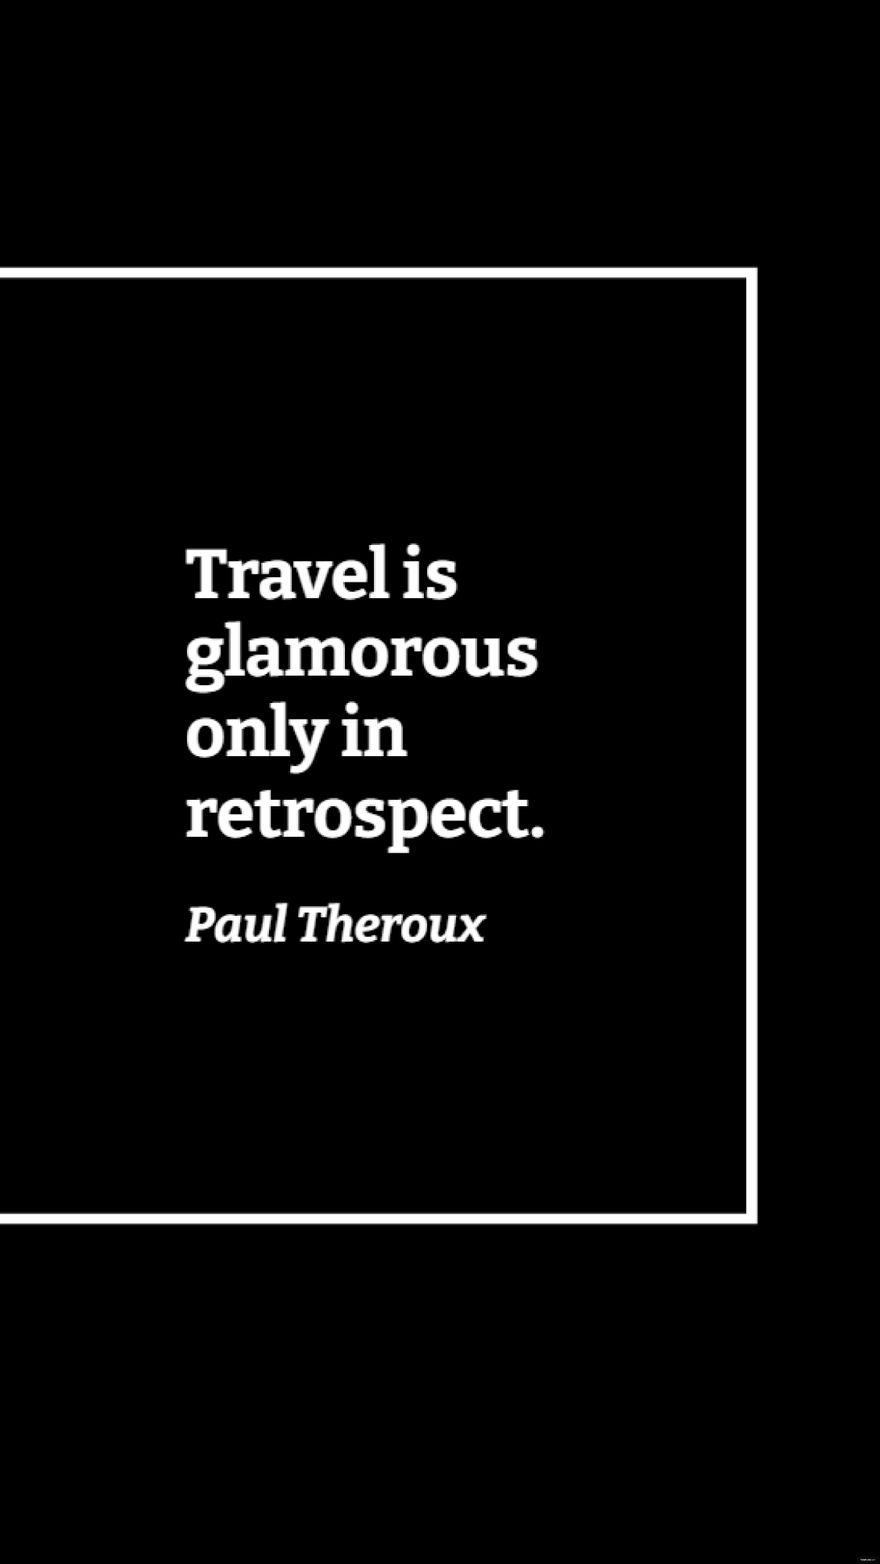 Free Paul Theroux - Travel is glamorous only in retrospect. in JPG